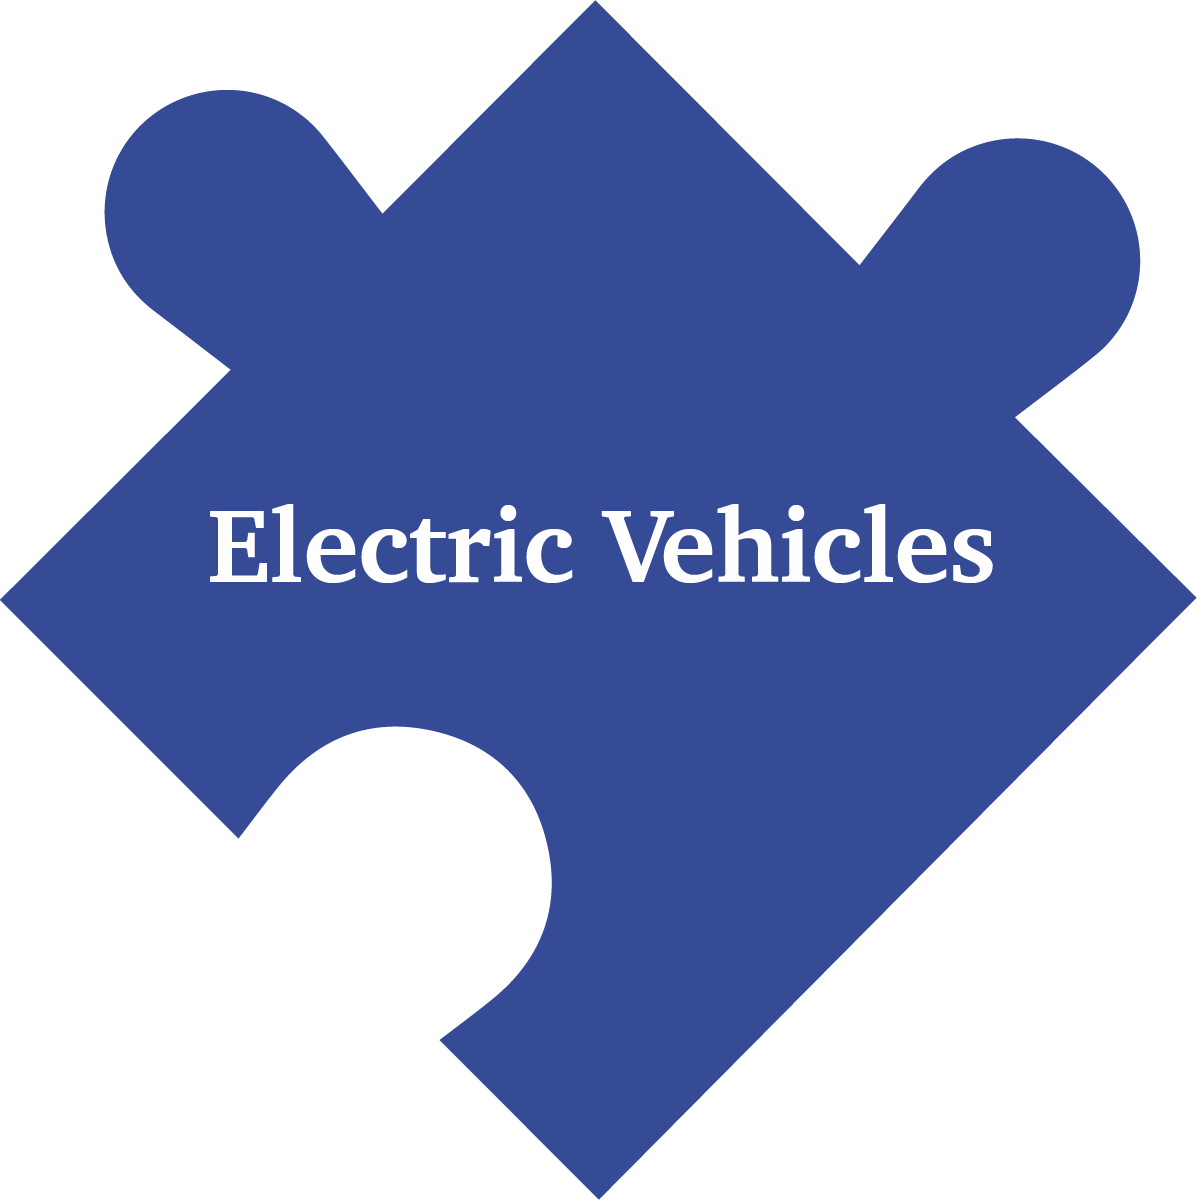 Puzzle piece with text - Electric Vehicles